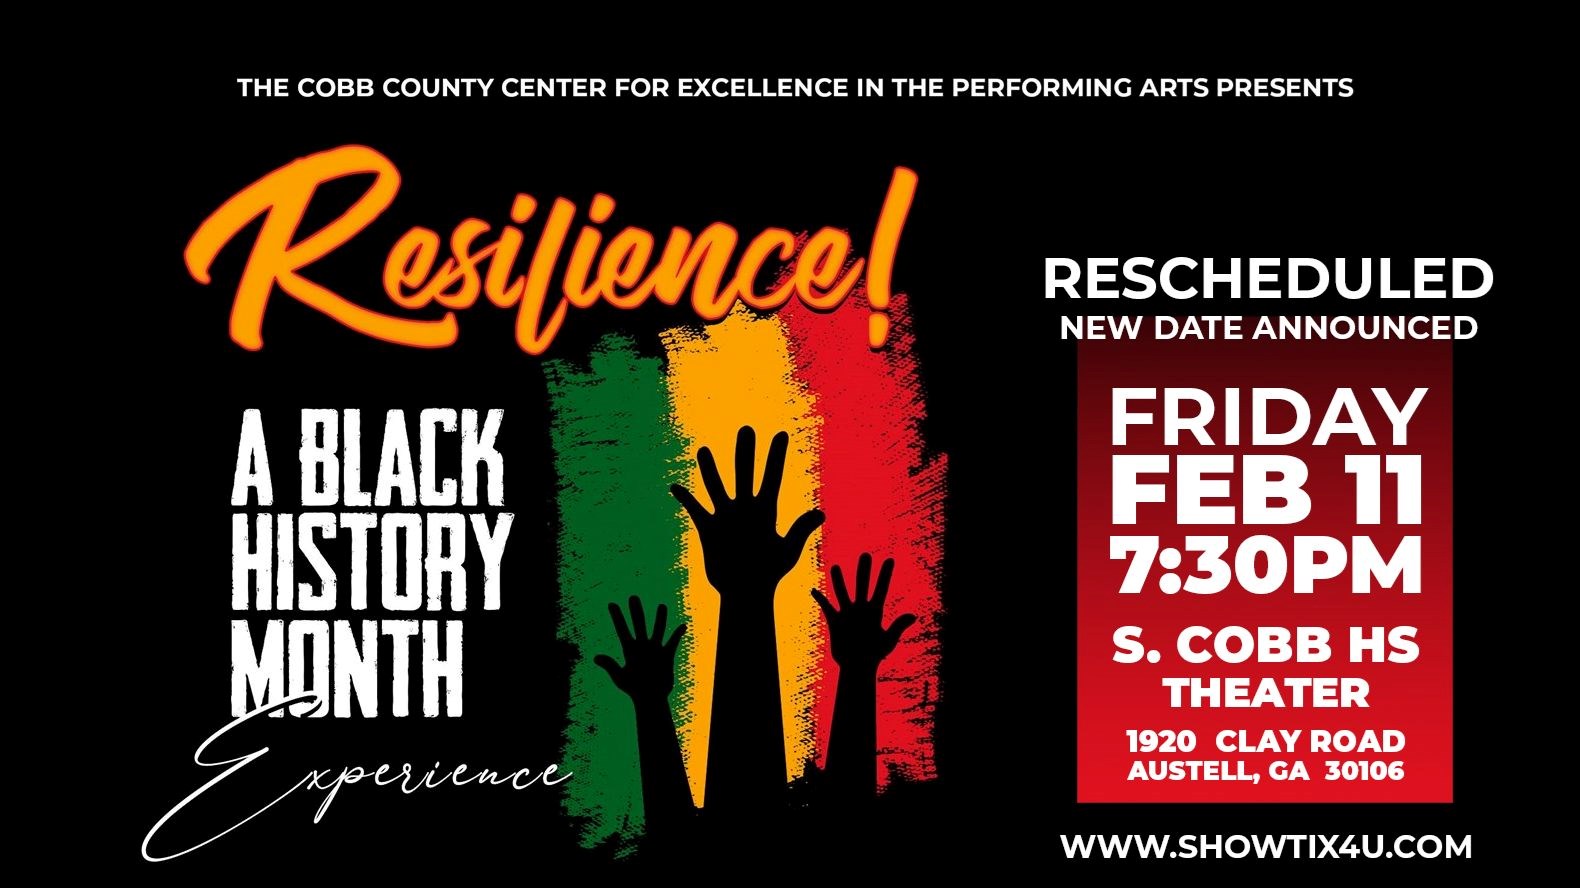 CCCEPA Reschedules BHM Experience for February 11